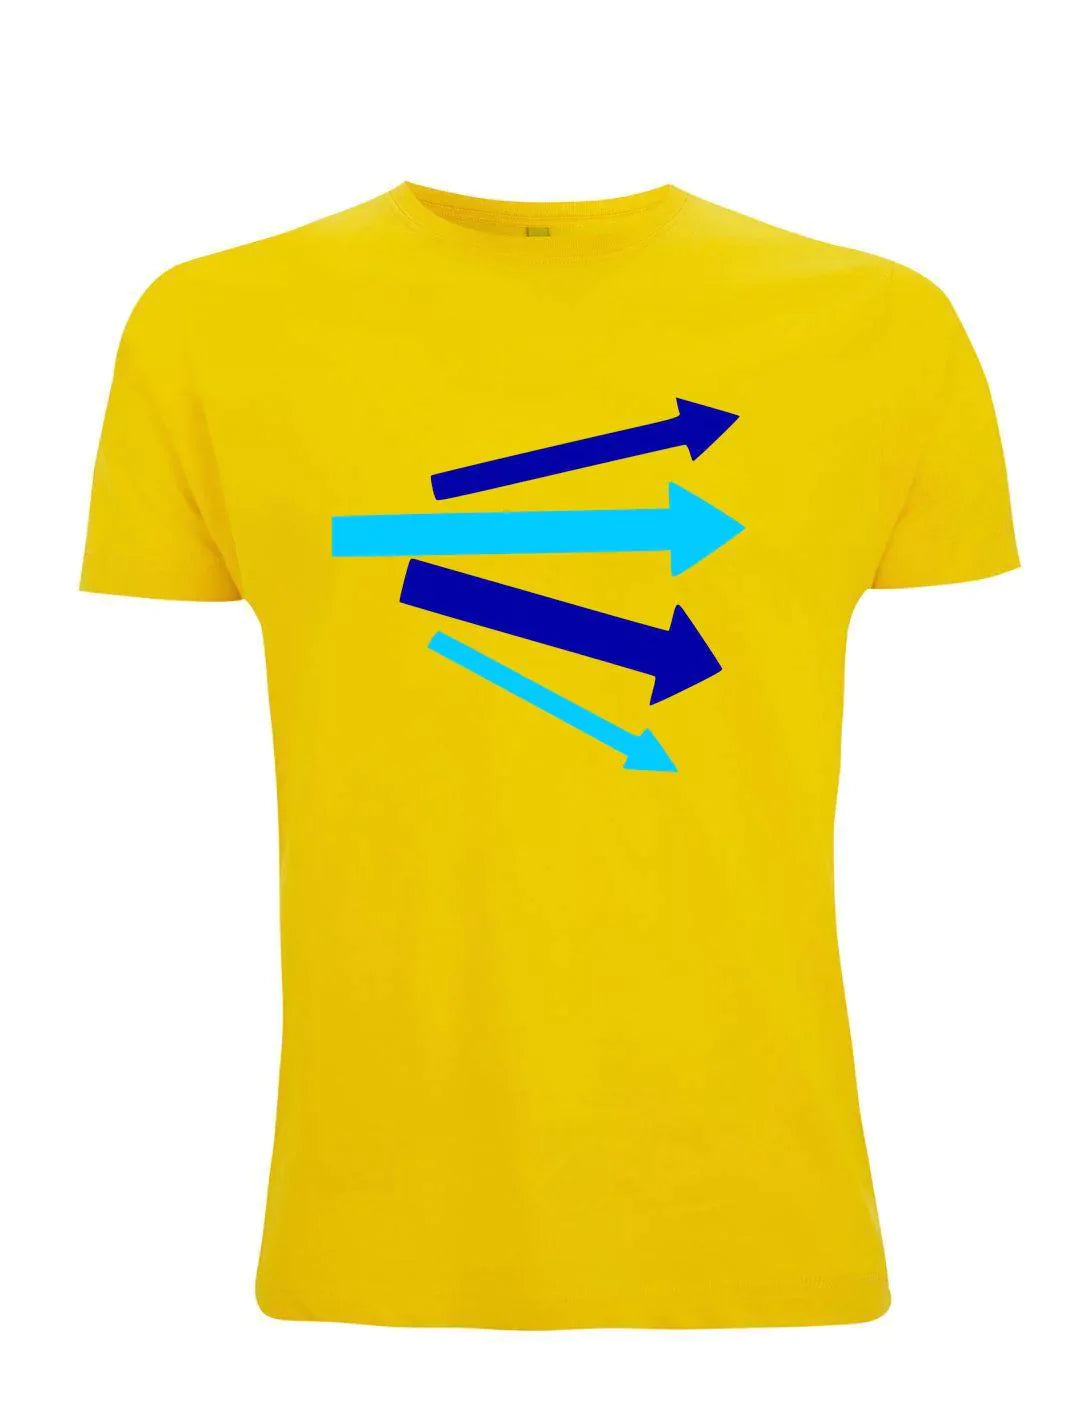 AMSTERDAM ARROWS: T-Shirt Inspired by The Jam (Many Colours) - SOUND IS COLOUR